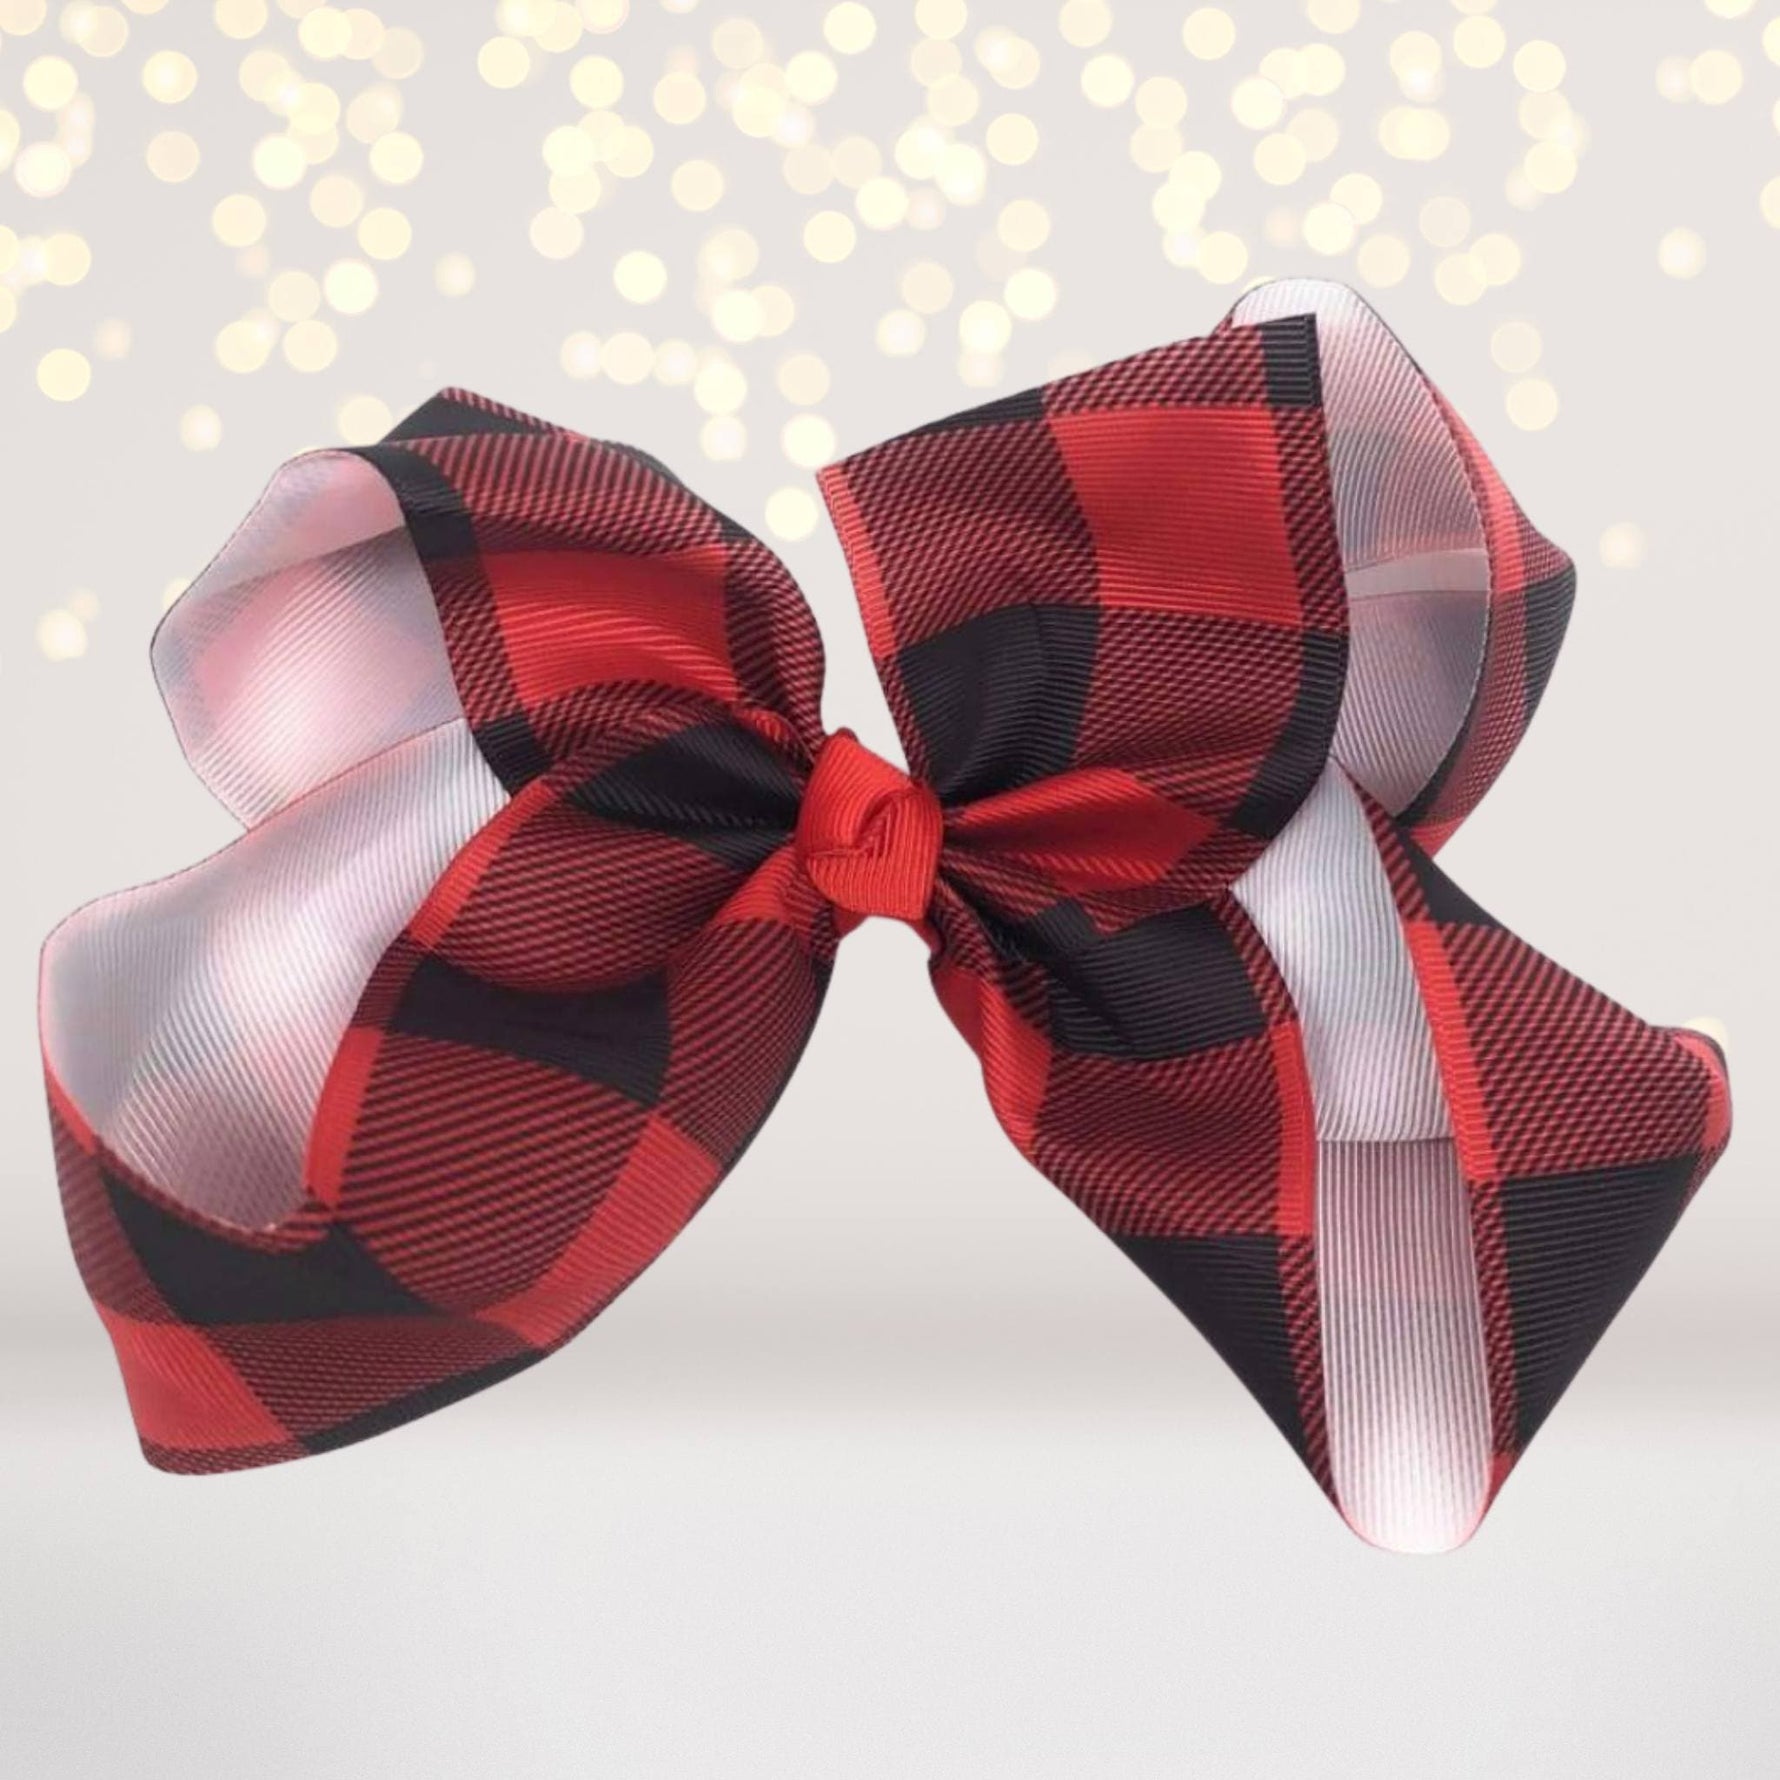 Hair Bow - Red And Black Plaid Hair Bow, Red Lumberjack Print Bow